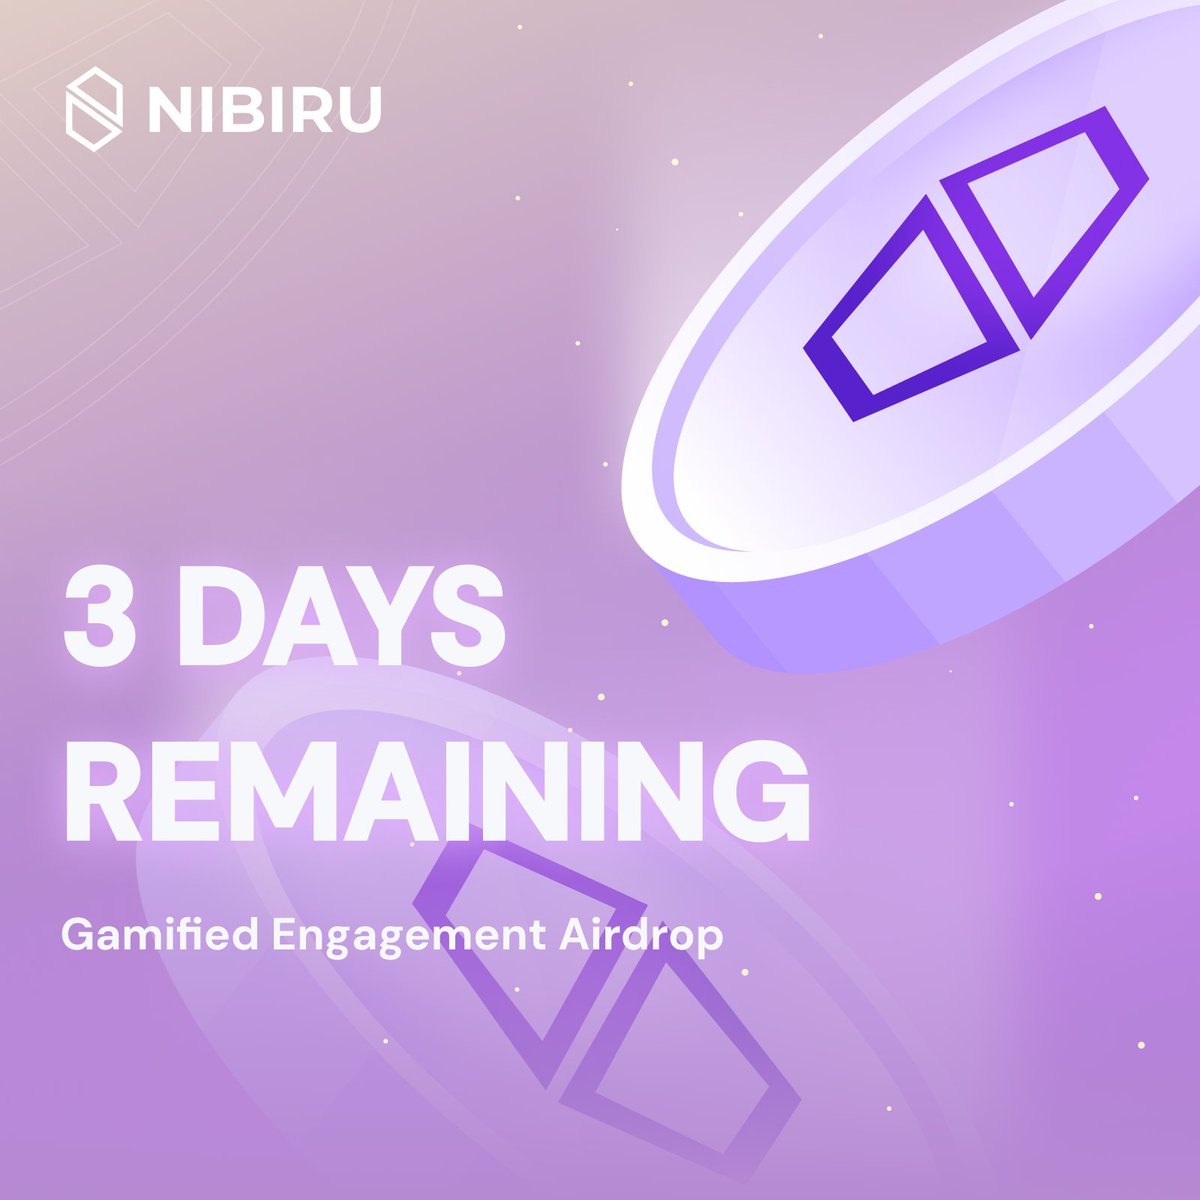 Nibi Army, there are only 3 days left in the Gamified Engagement Airdrop! Remember, every post you engage with counts. 💜 nibiru.fi/airdrops